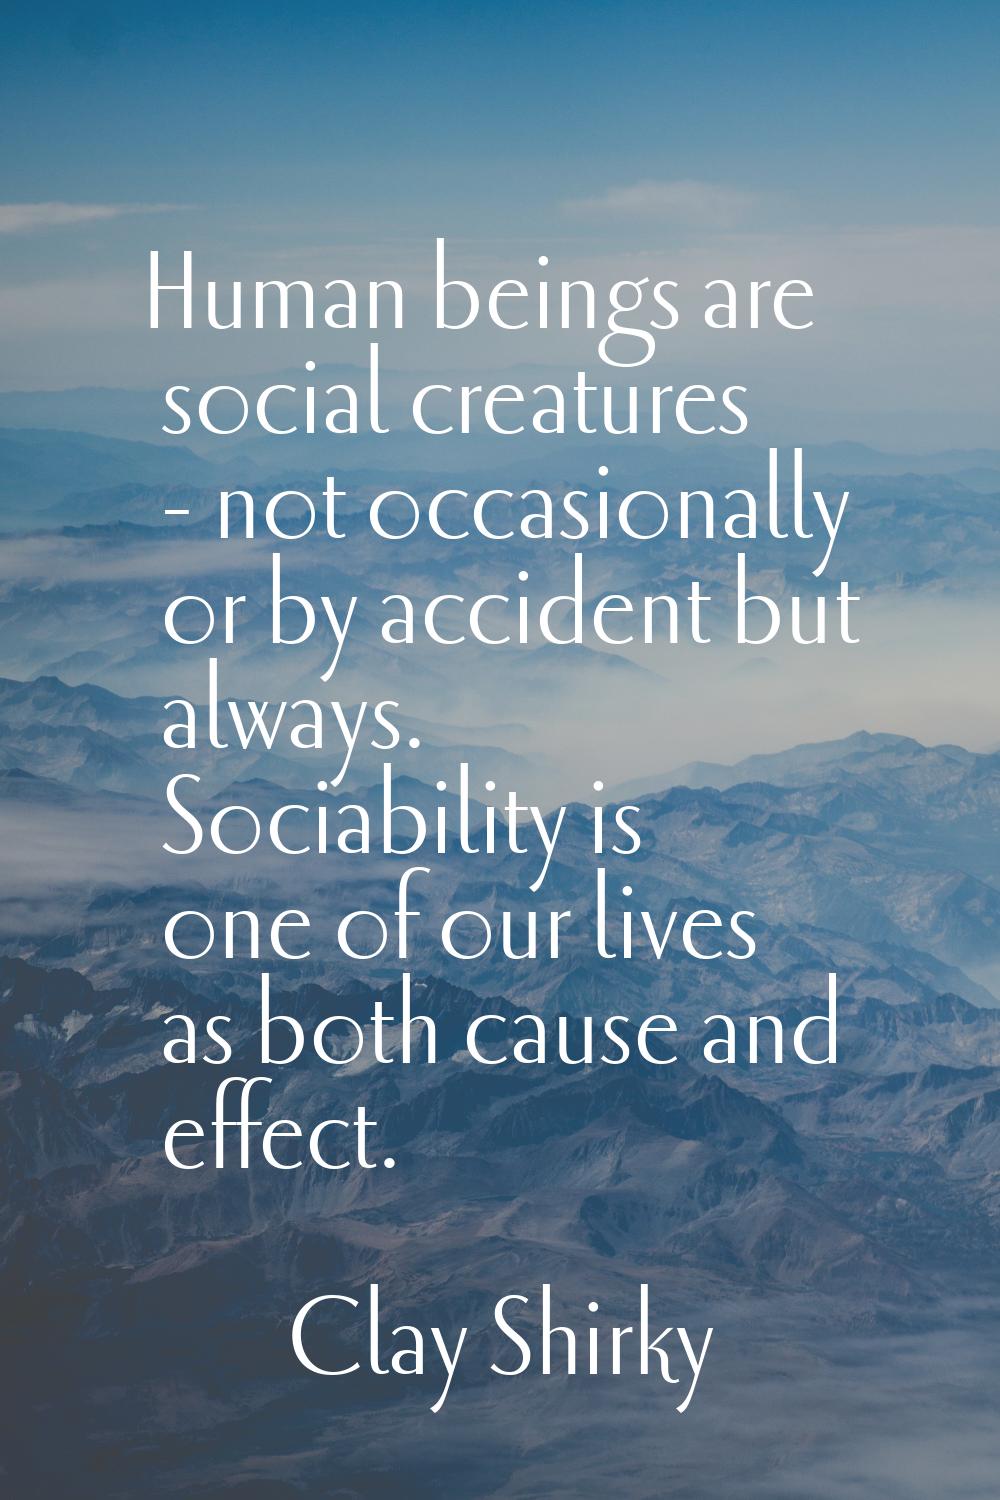 Human beings are social creatures - not occasionally or by accident but always. Sociability is one 